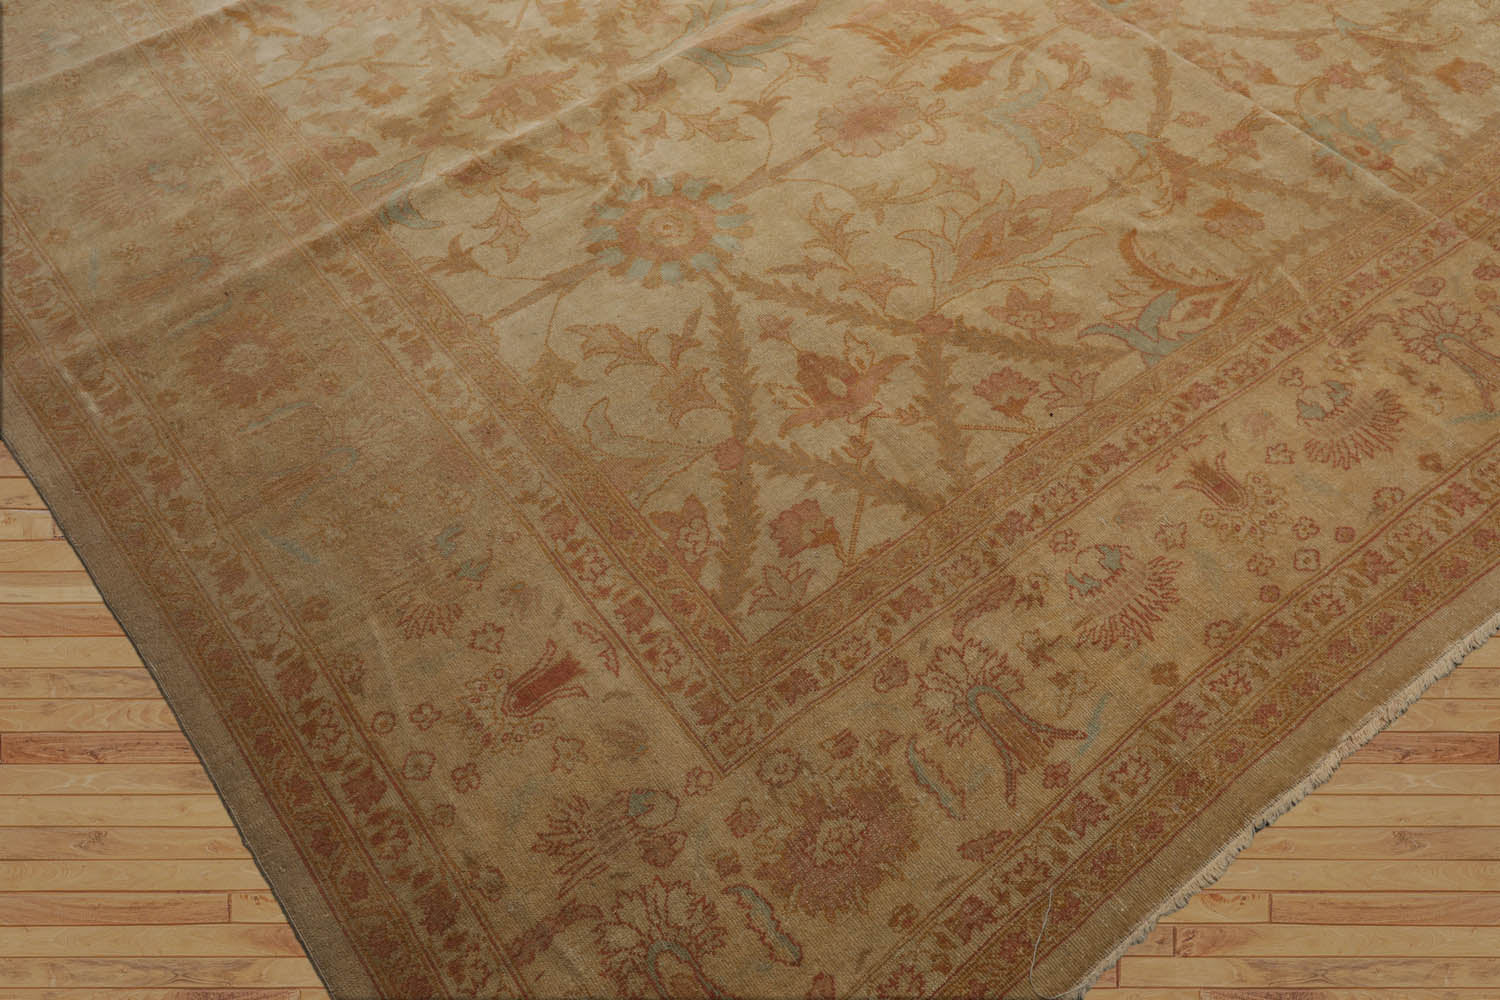 Abramina Palace Hand Knotted 100% Wool Oushak Traditional Oriental Area Rug Beige, Tan Color